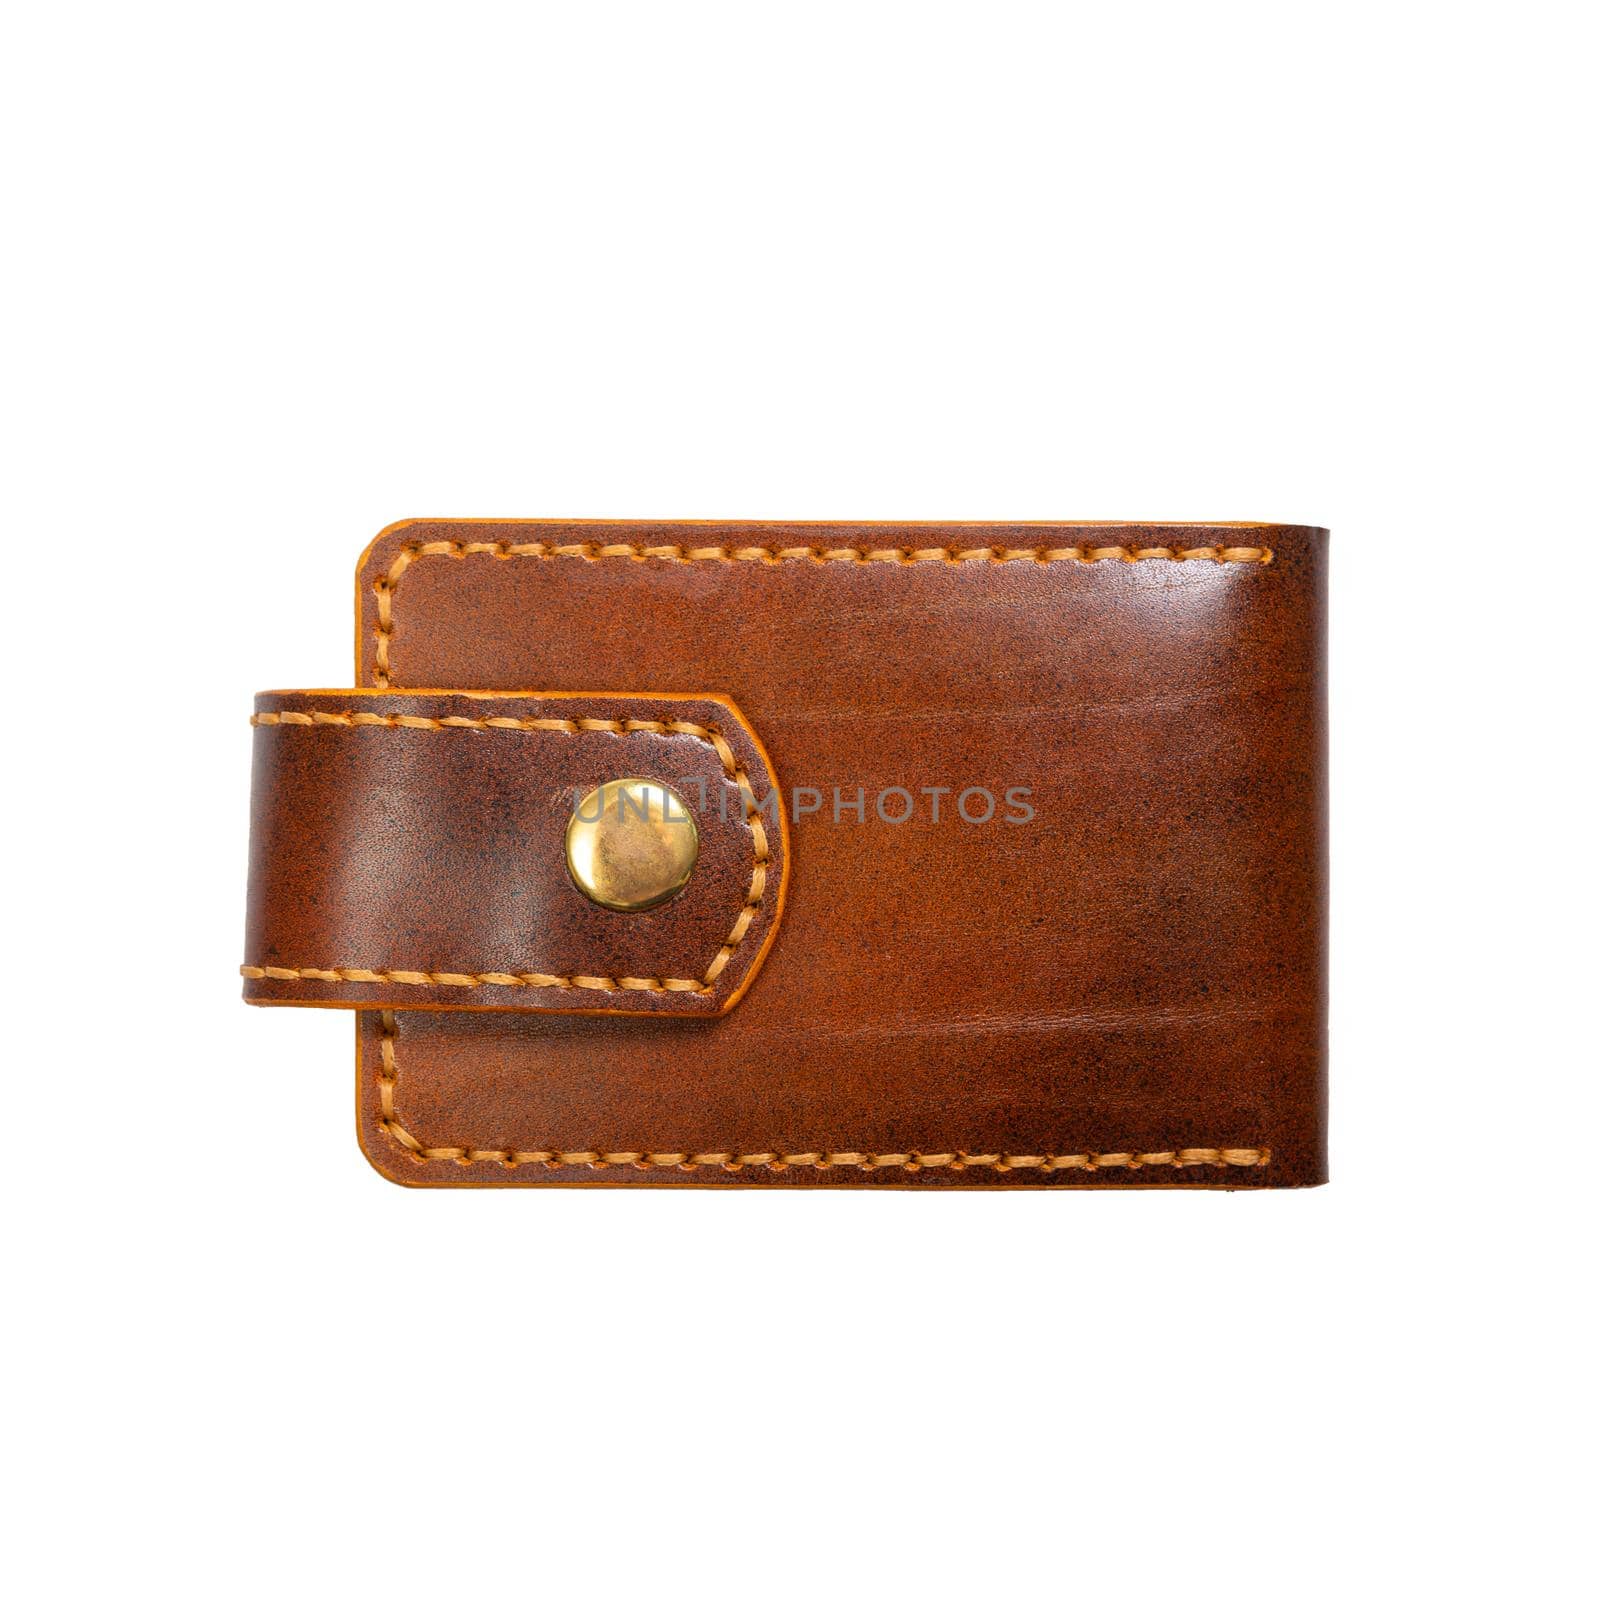 Luxury craft business card holder case made of leather. Brown Leather box for cards isolated on white background.